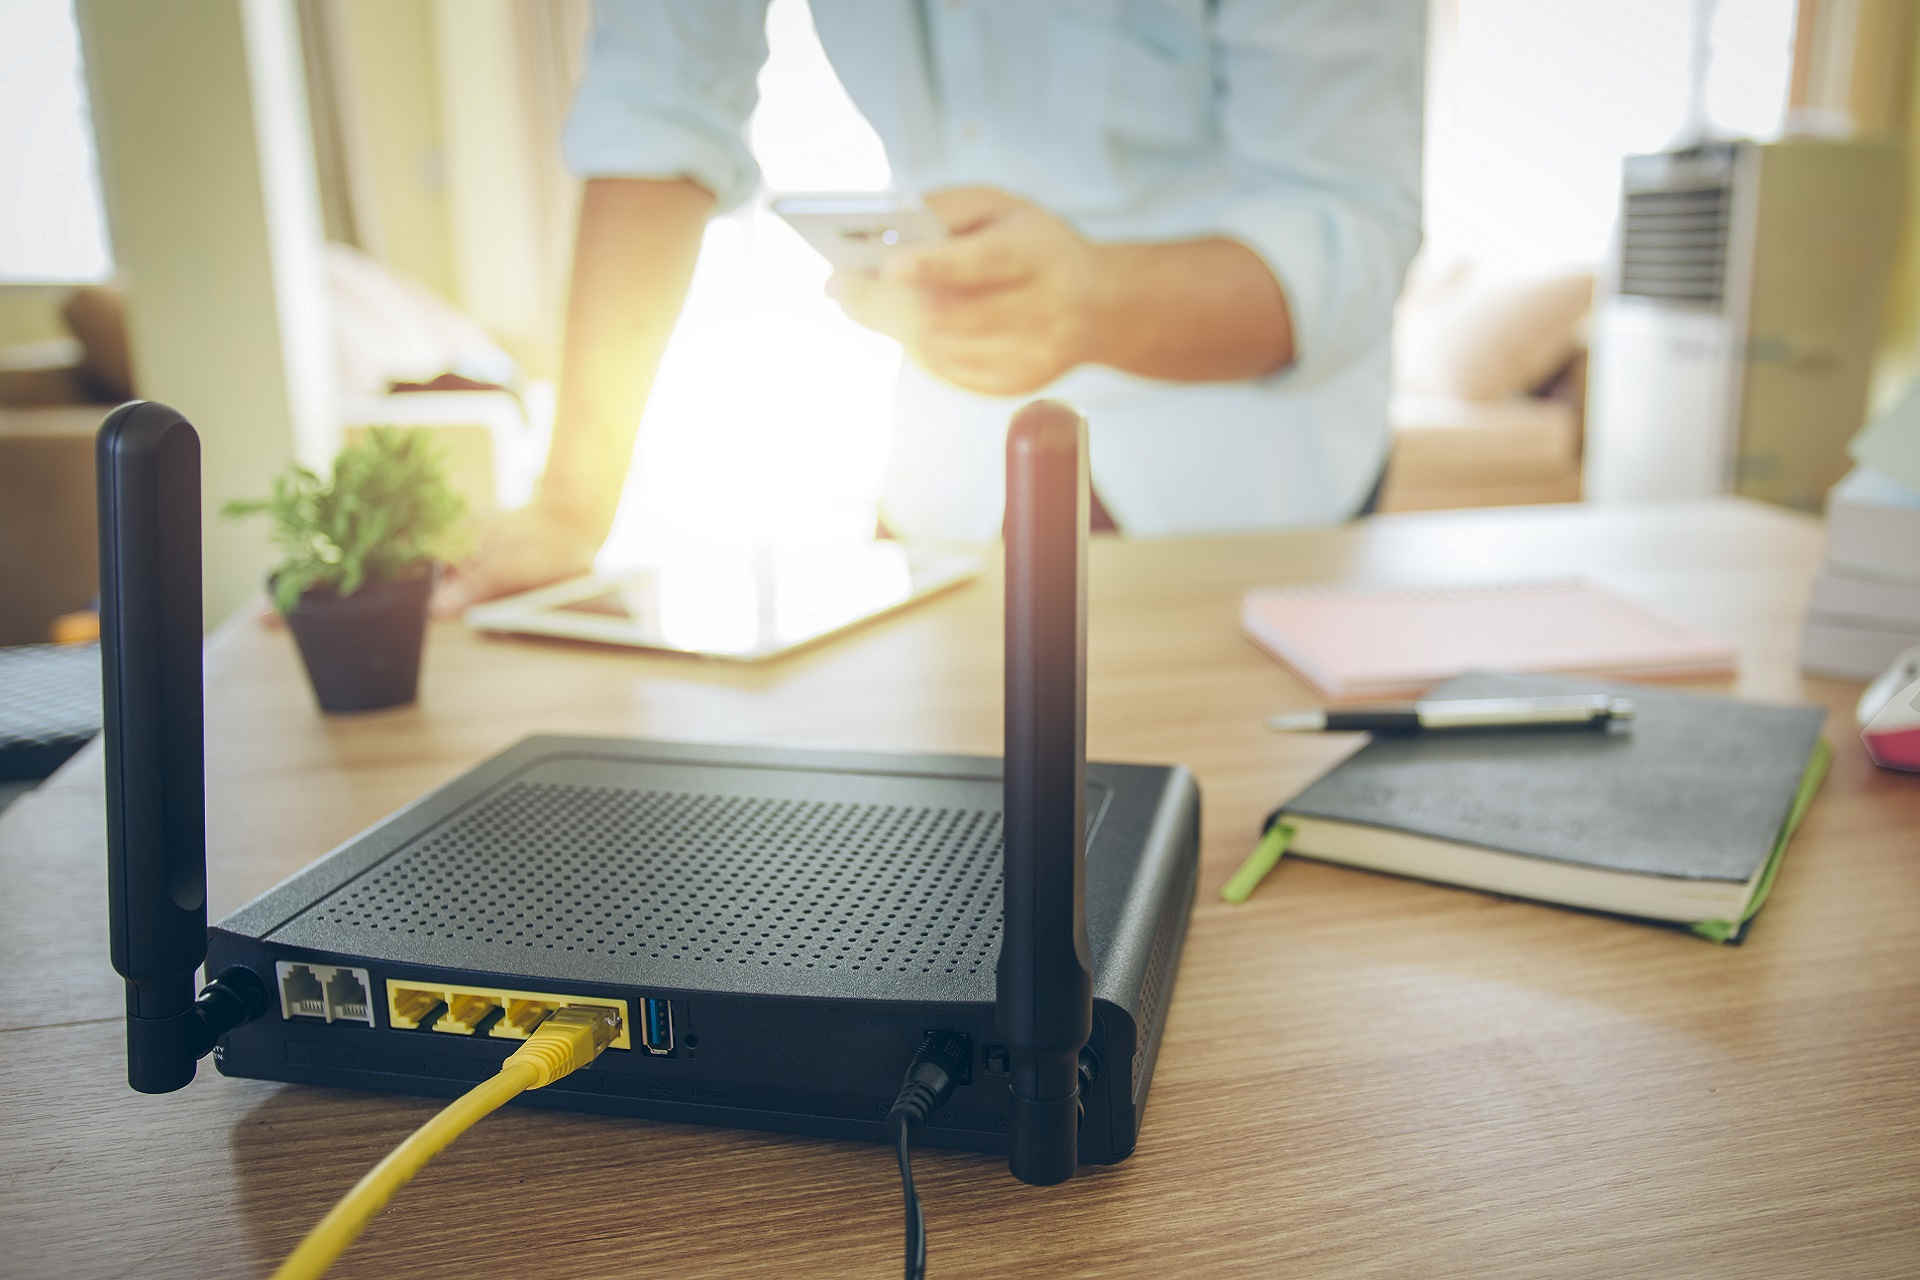 How to Fix Problems with Wireless N Routers